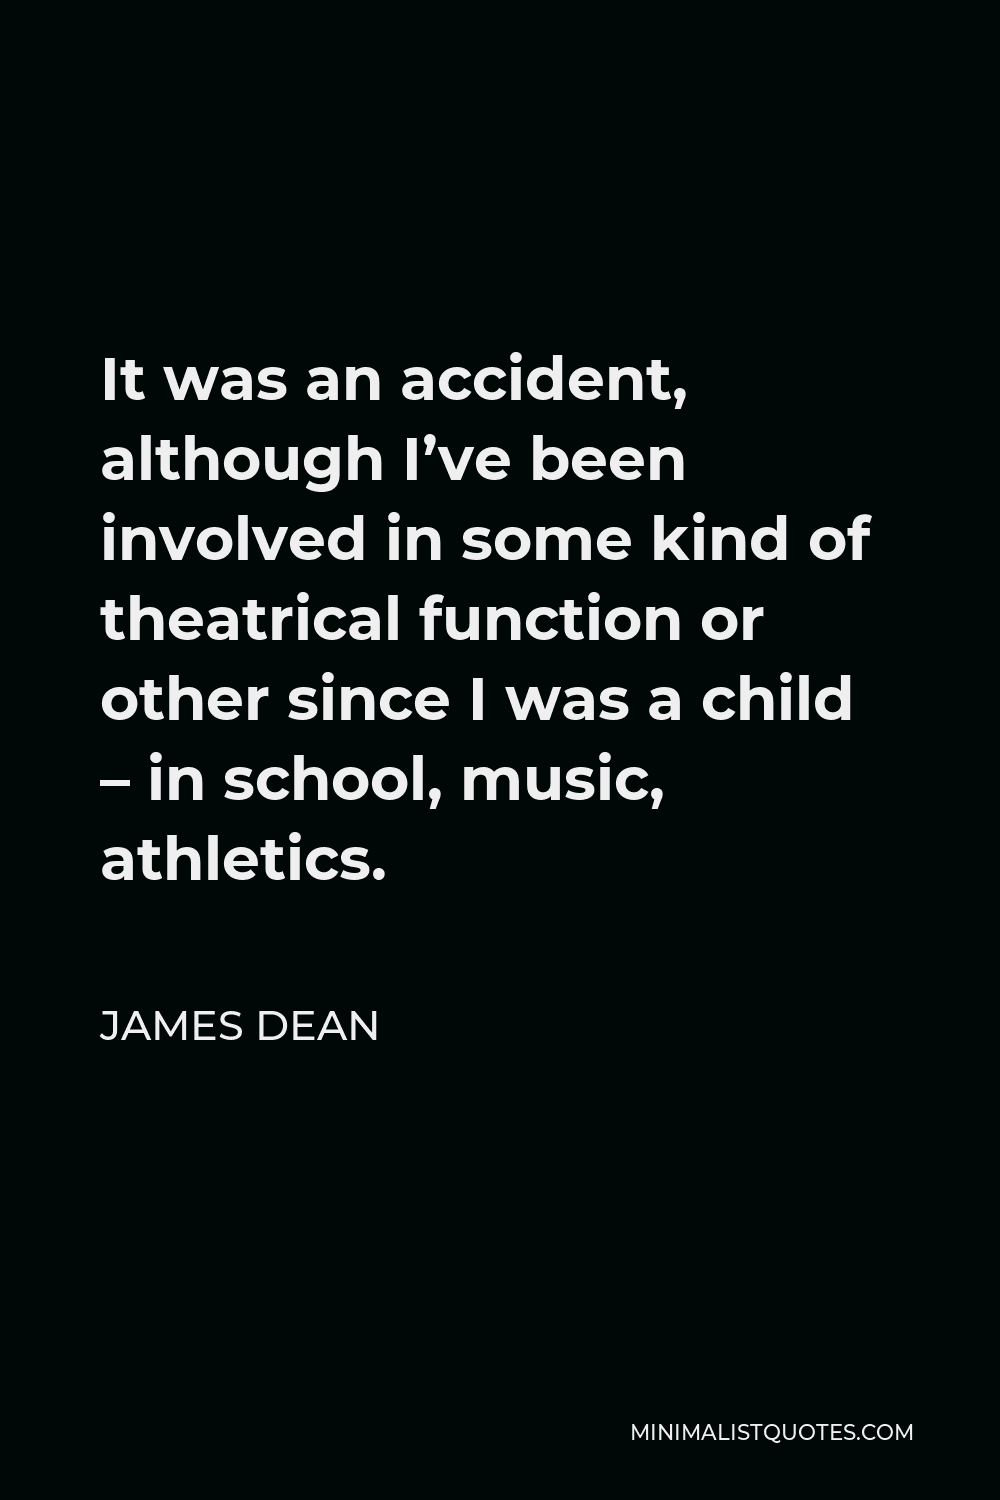 James Dean Quote - It was an accident, although I’ve been involved in some kind of theatrical function or other since I was a child – in school, music, athletics.